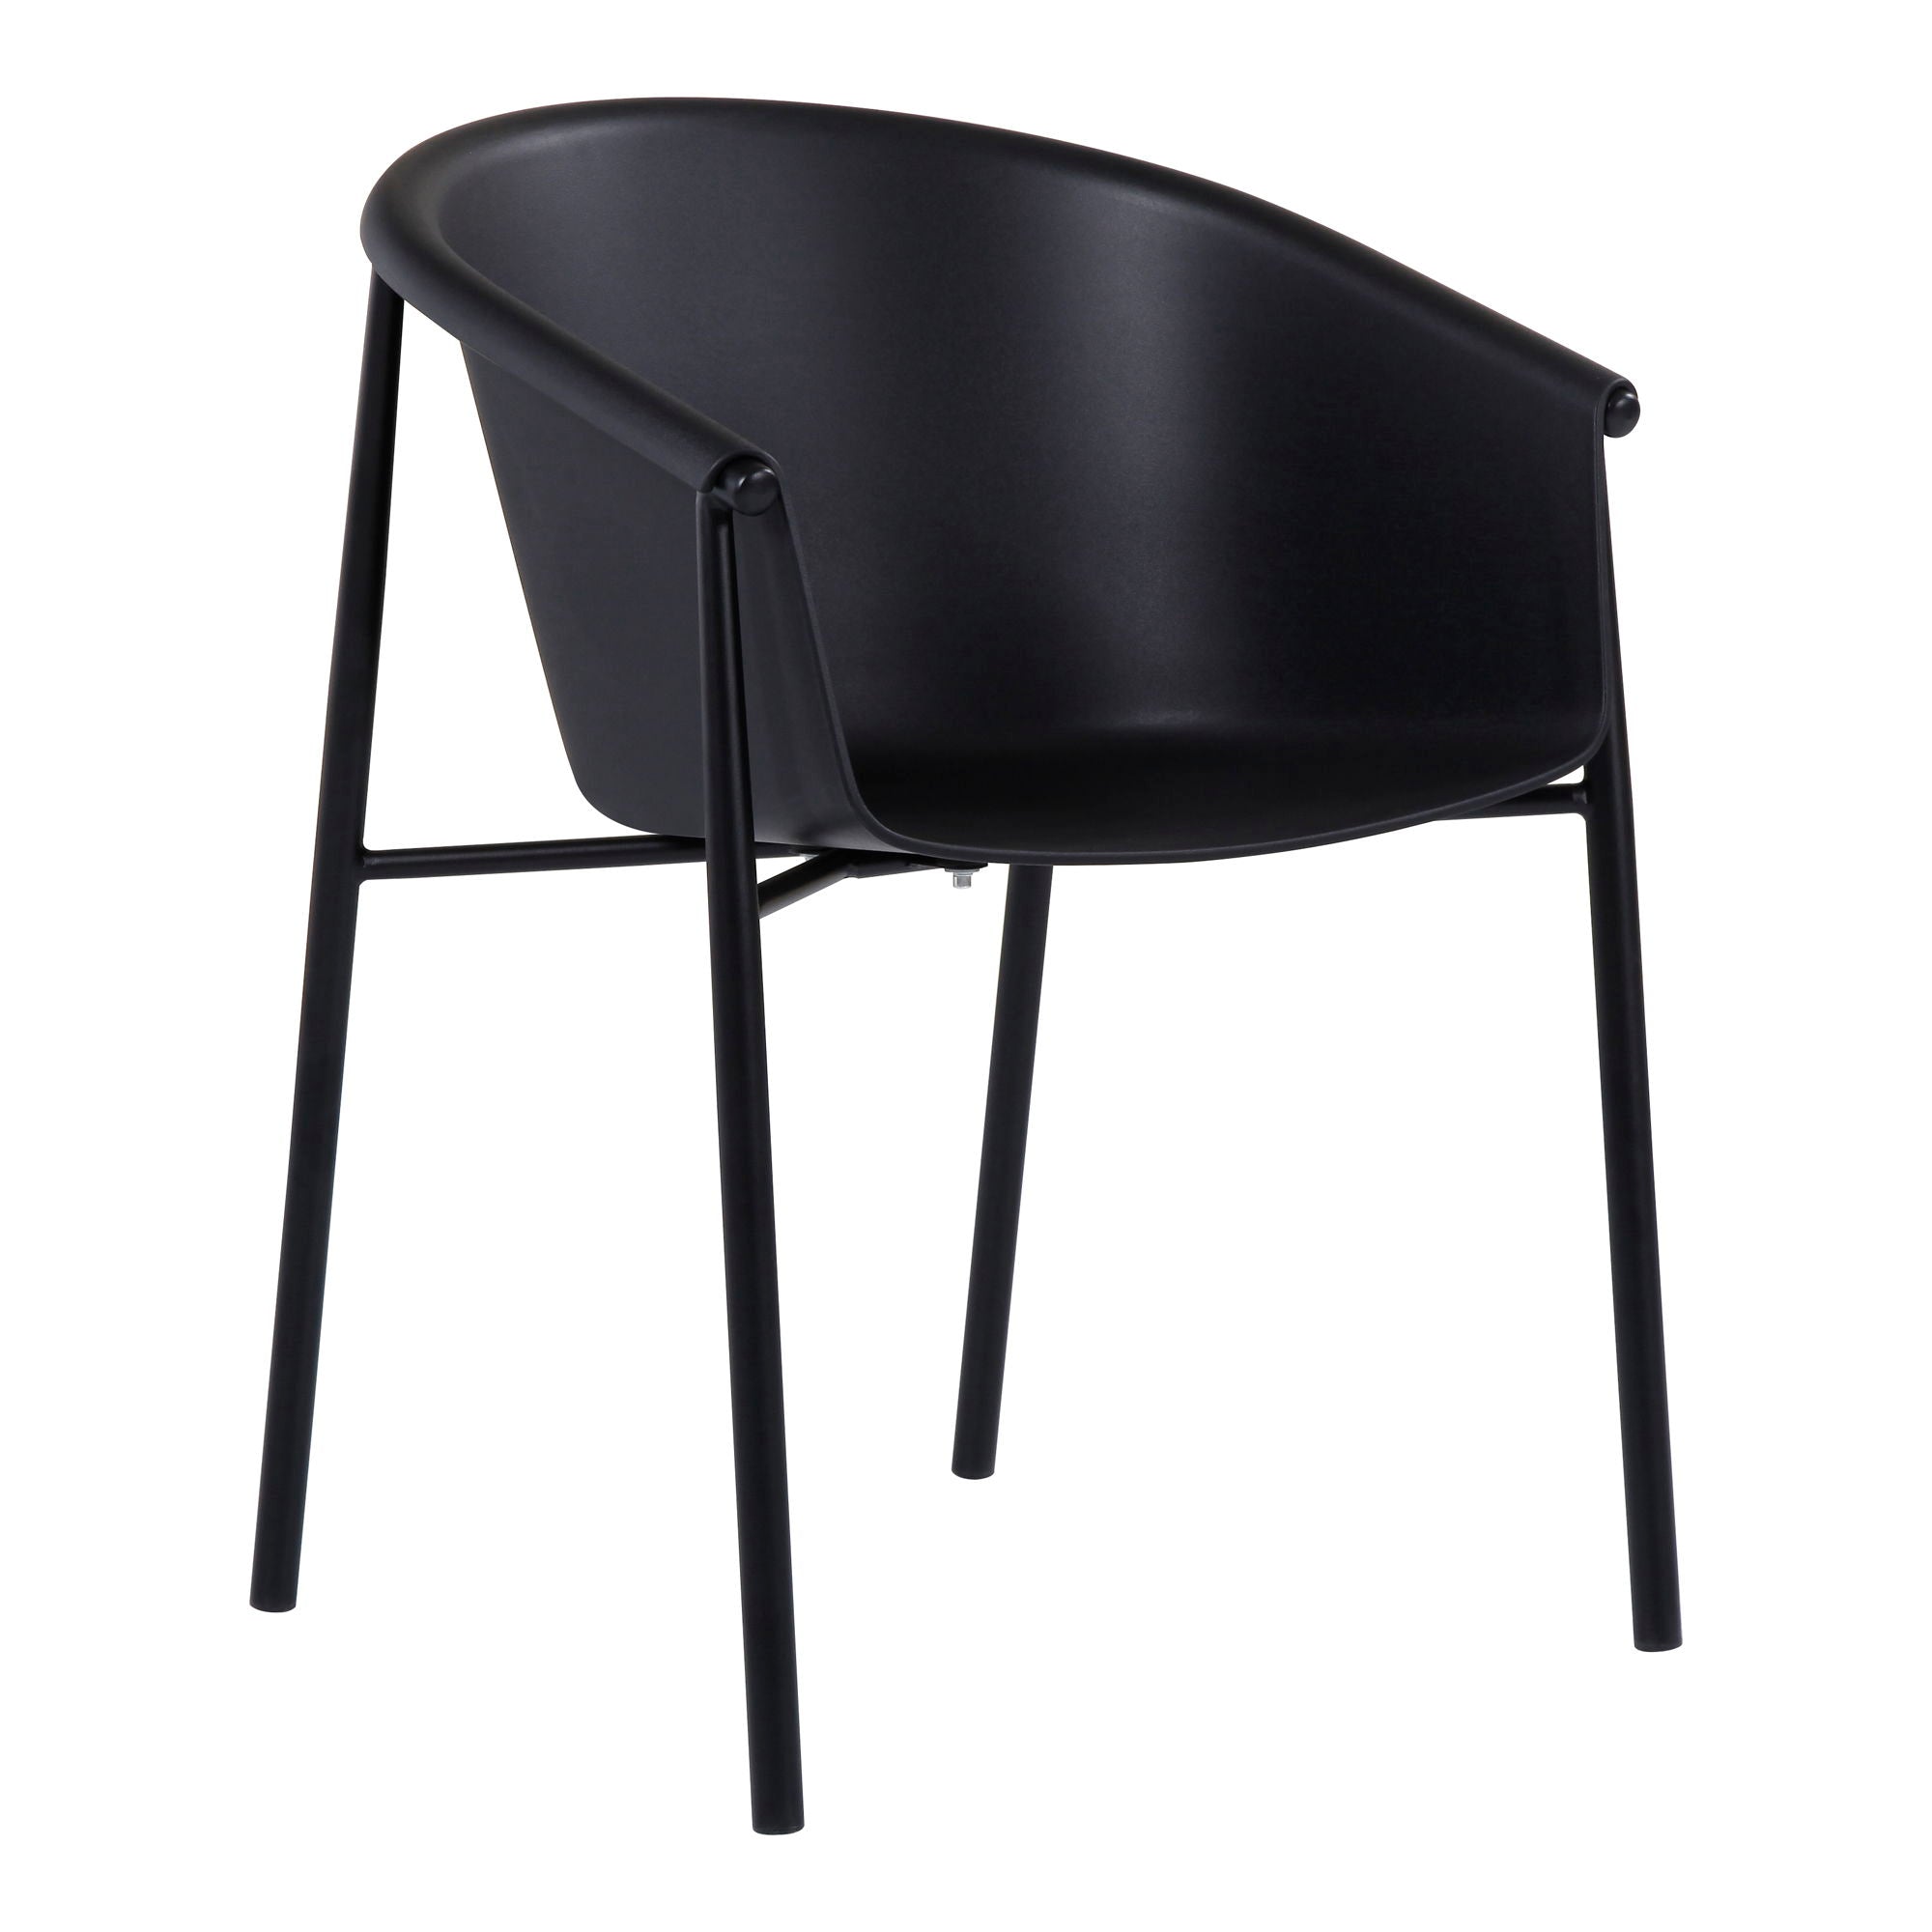 Shindig - Outdoor Dining Chair - M2 - Black